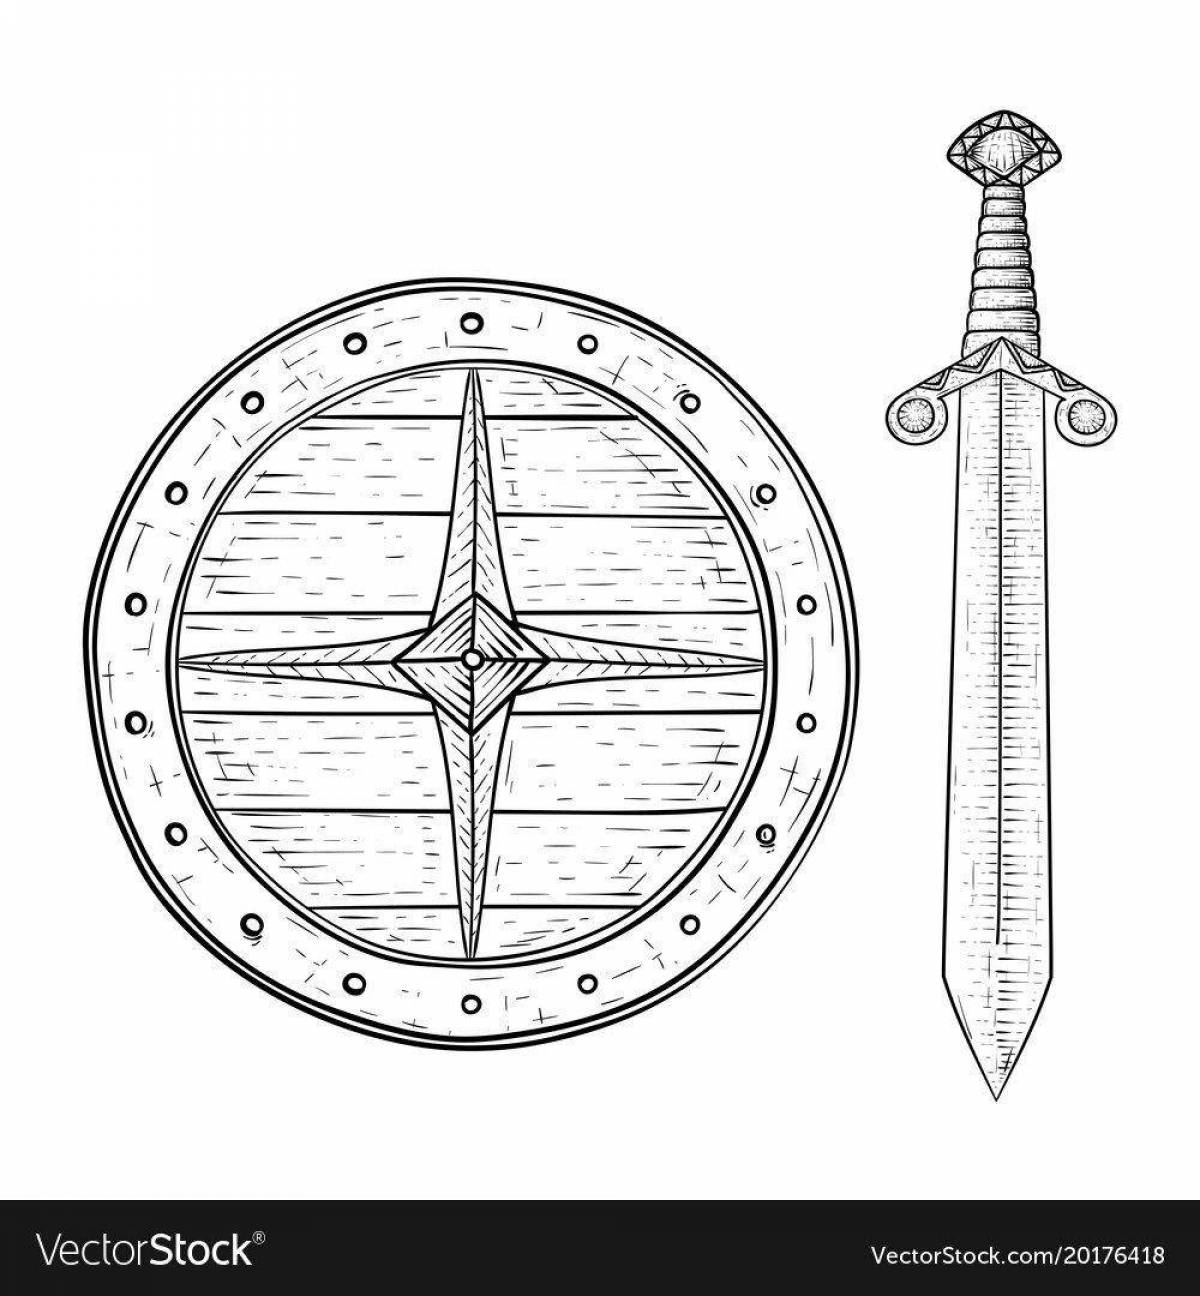 Ornate hero's shield coloring page